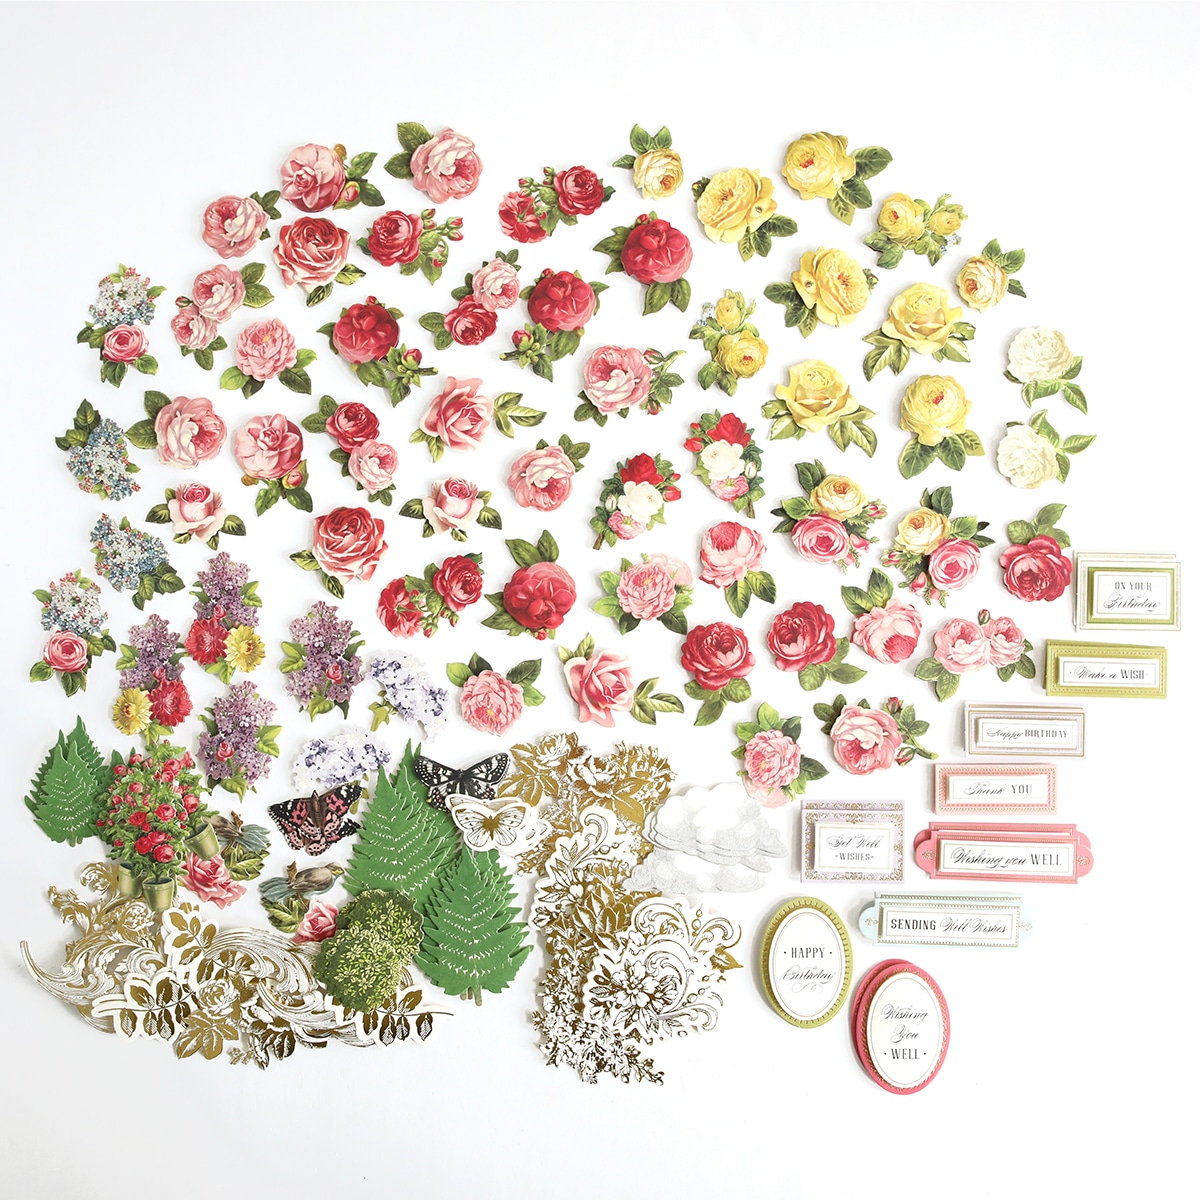 A collection of flowers, leaves, and other items on a white surface.